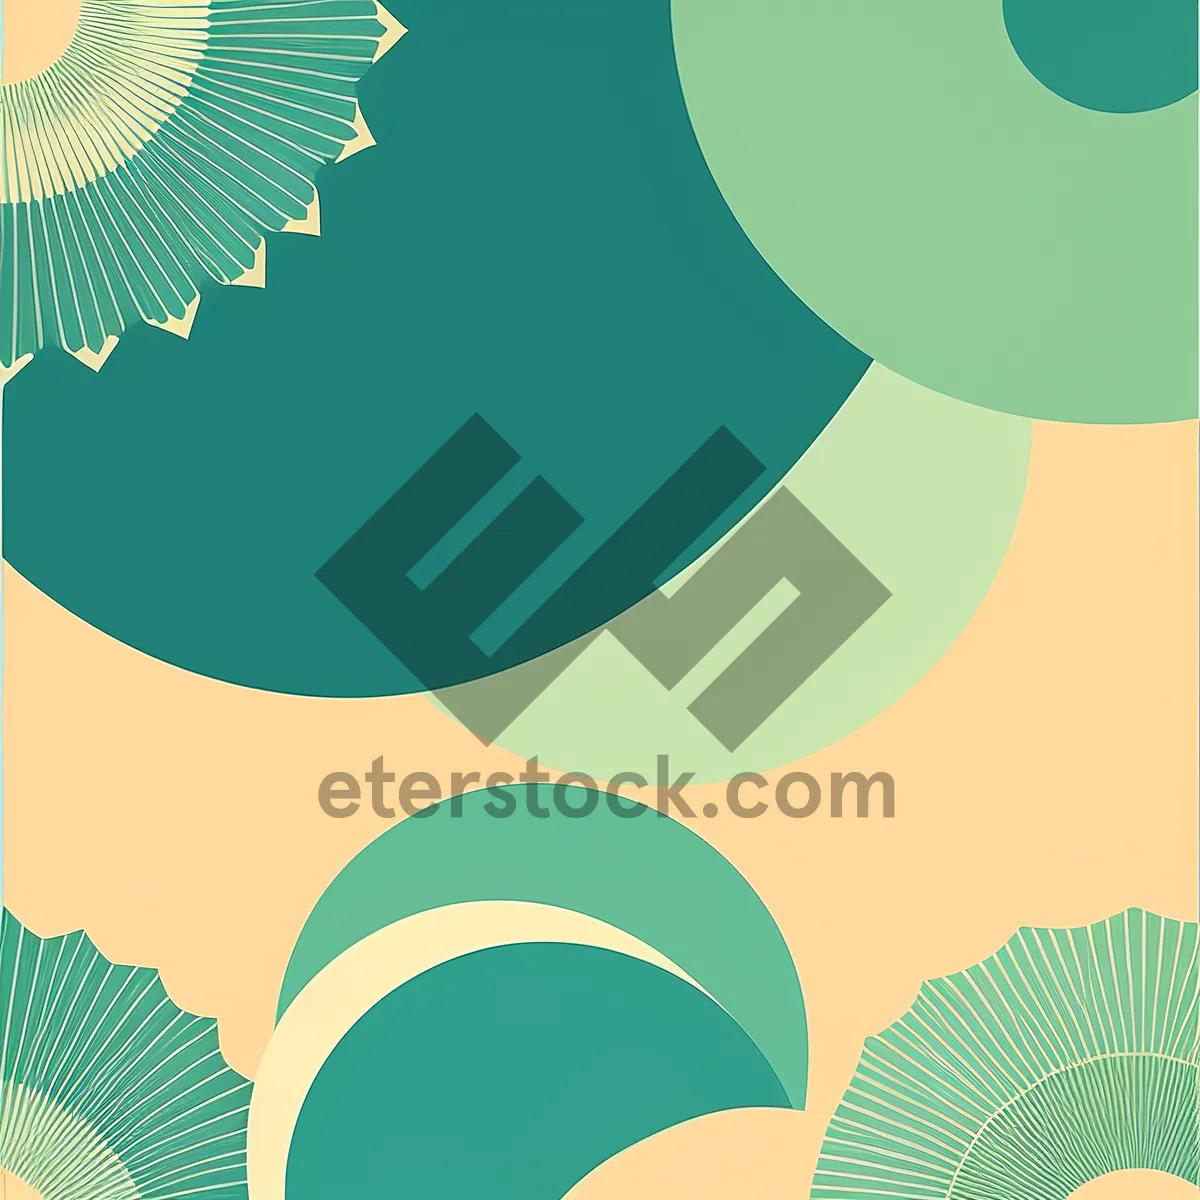 Picture of Vibrant Traced Graphic Art Wallpaper with Curved Shapes